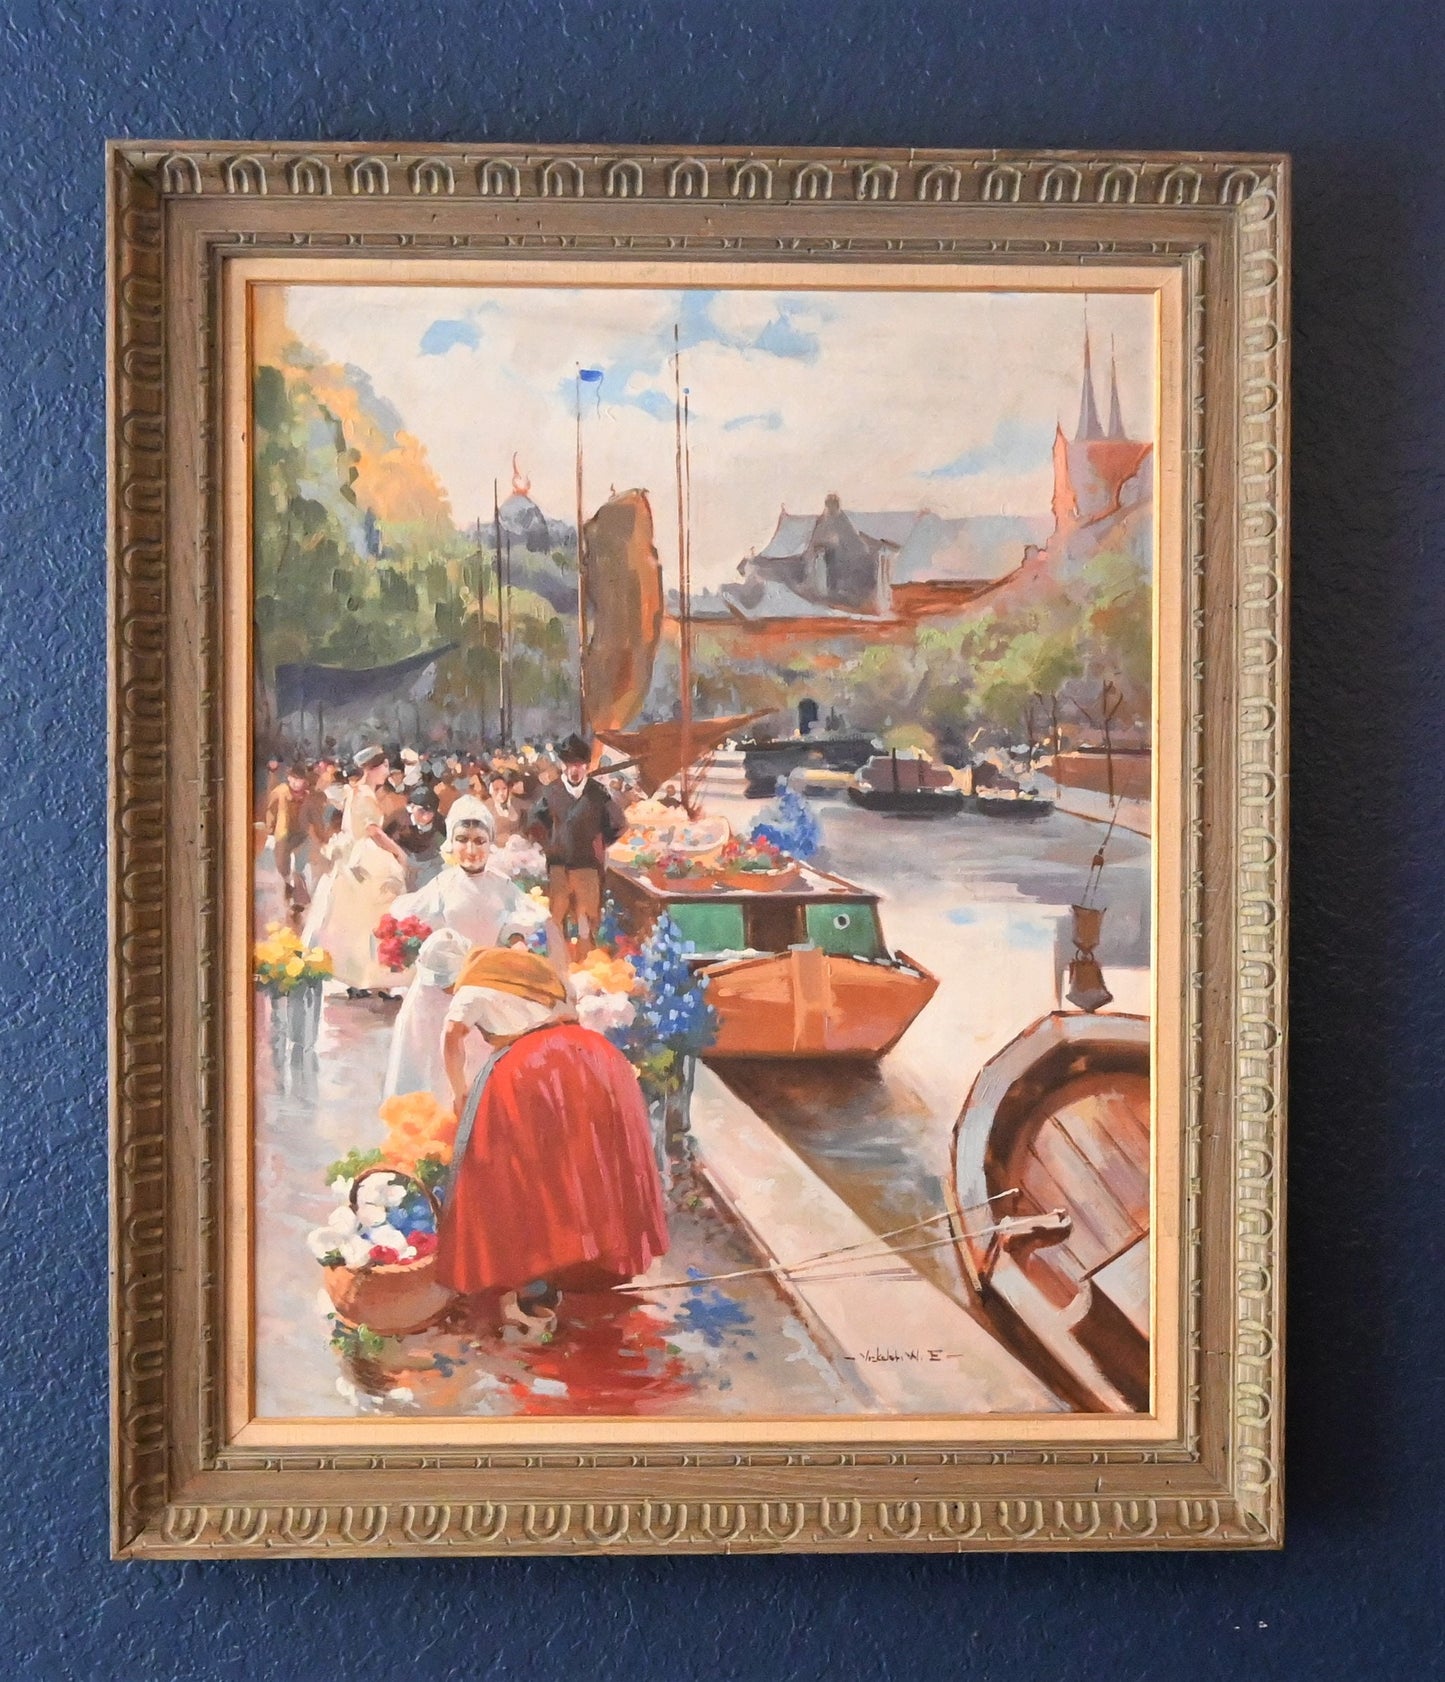 Witman Etelka Vizkeleti (Hungarian 1882-1962) Large Original Oil - 36.25"H x 30.5"W- Well listed-Stunning! high auction and galley prices!